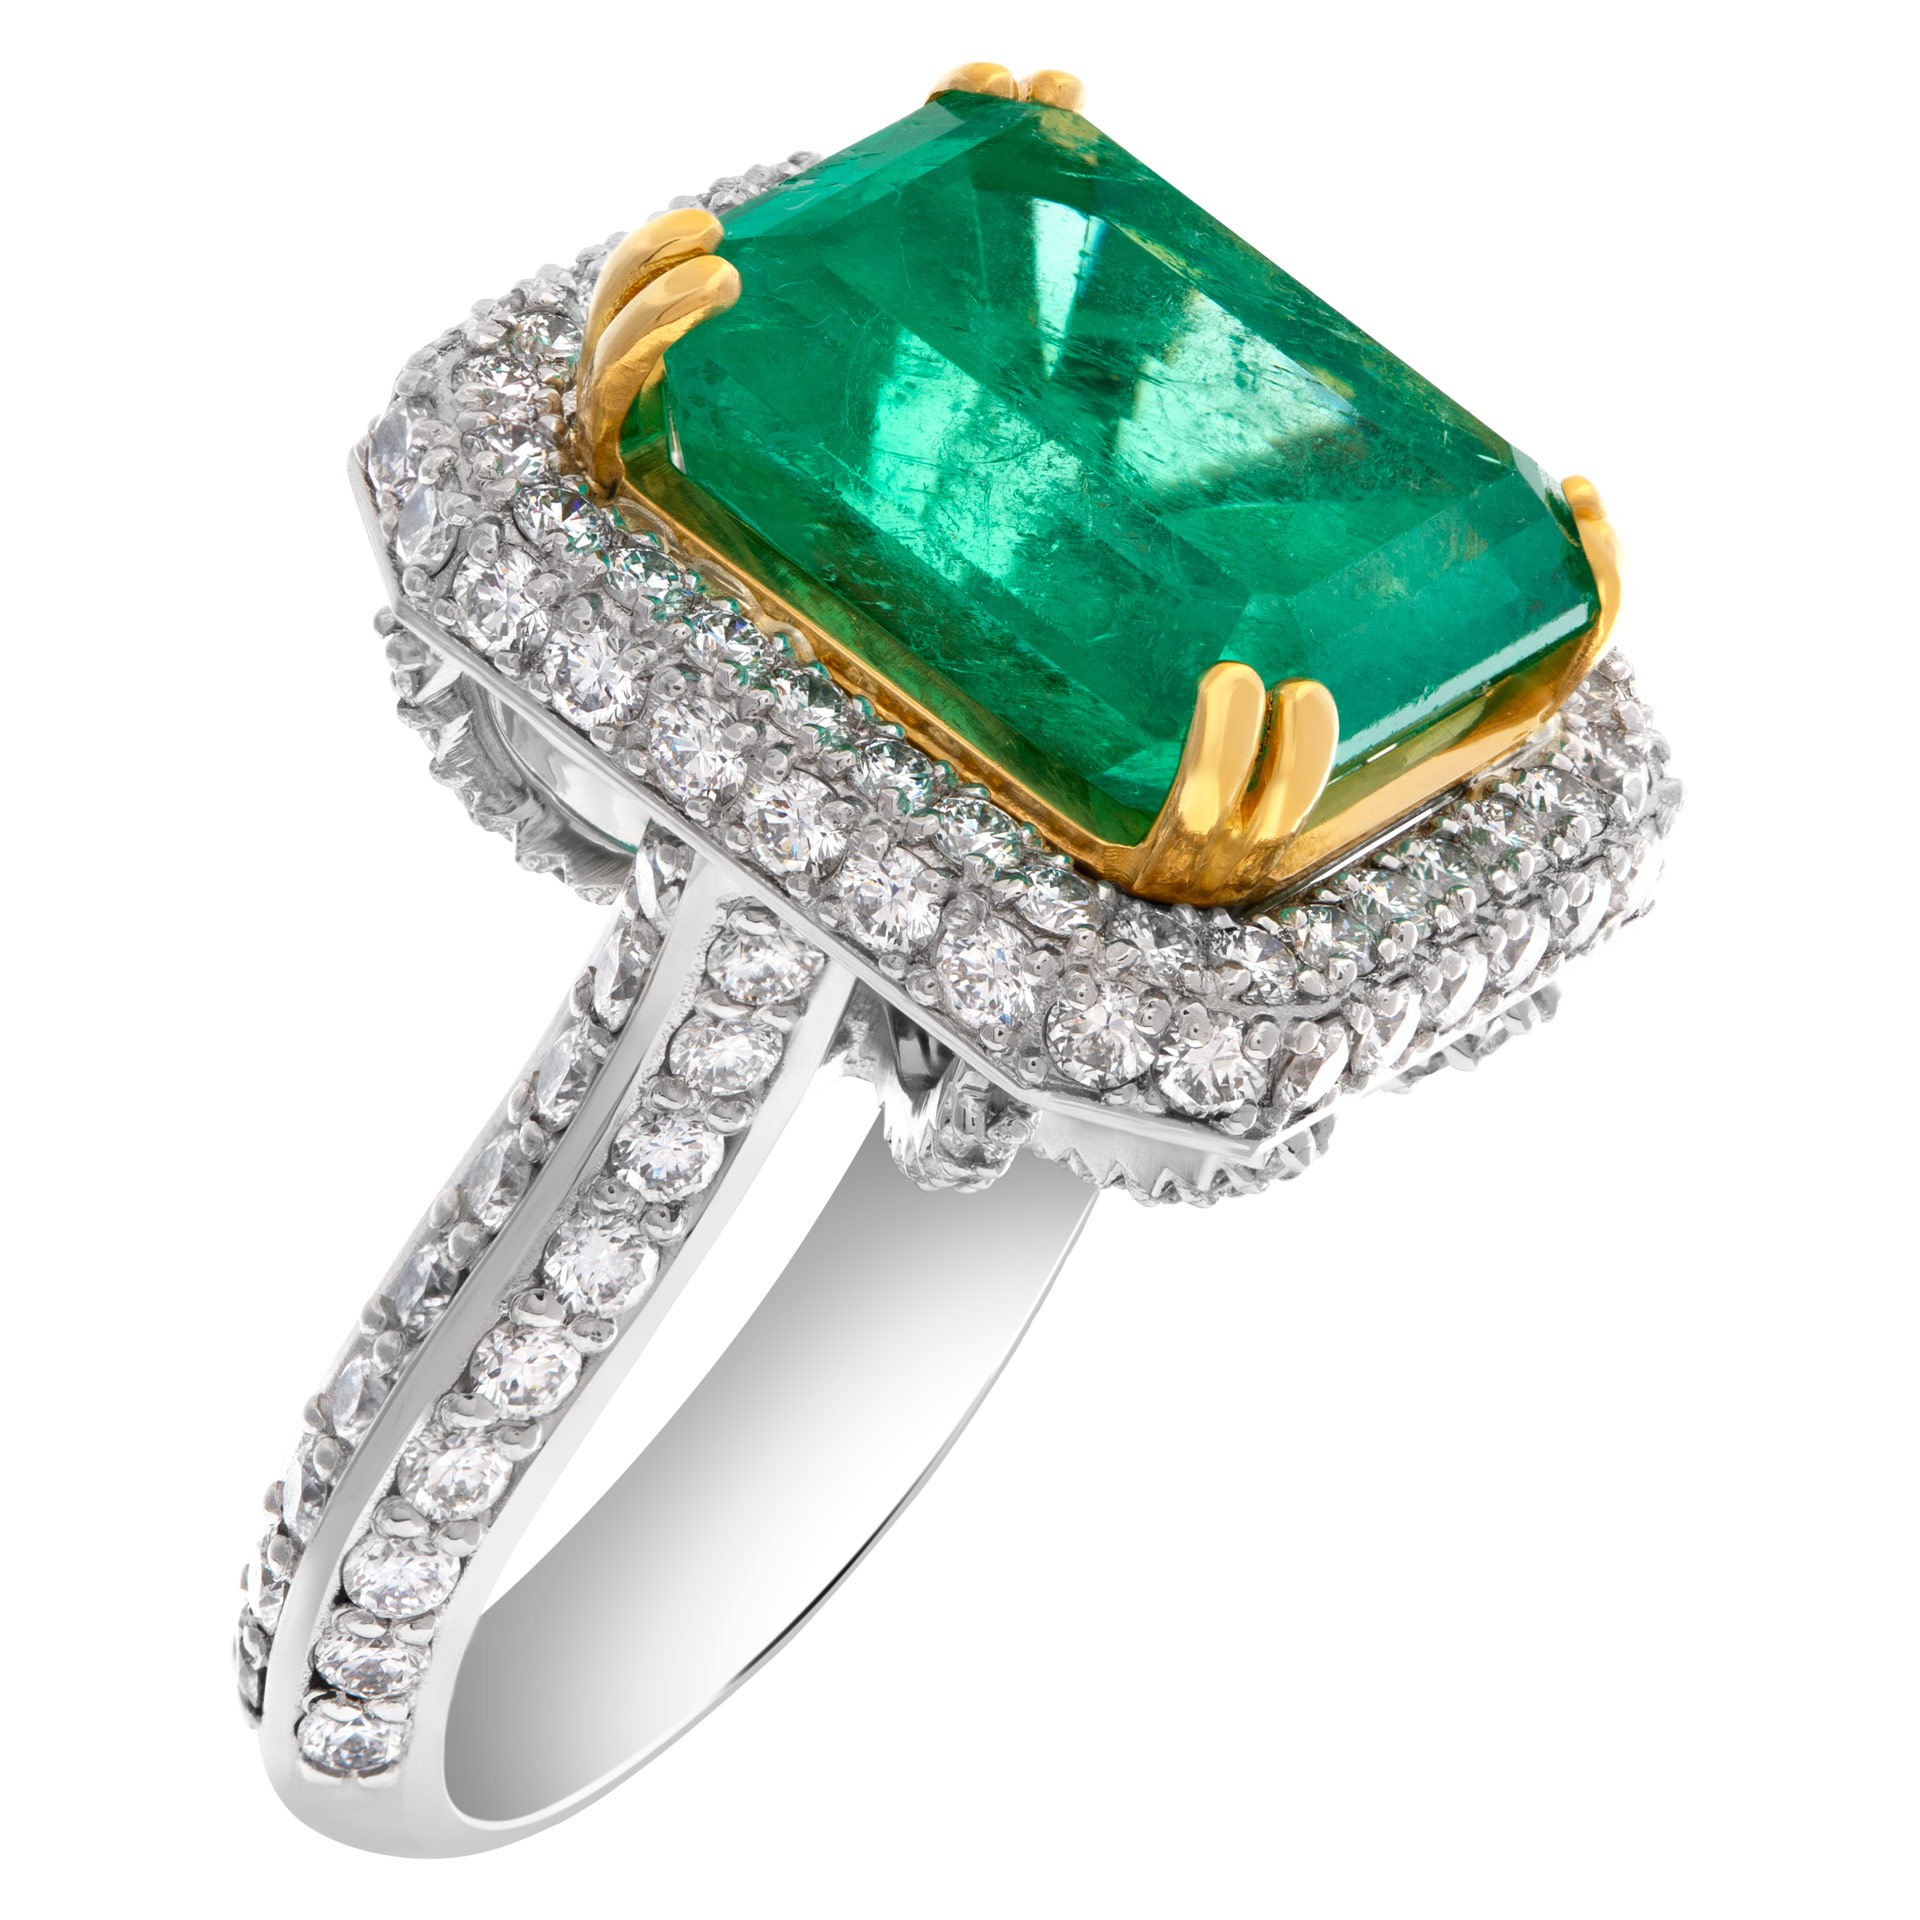 AGL certified 13.01 carat emerald ring in platinum & 18k with 4 carats in pave diamonds